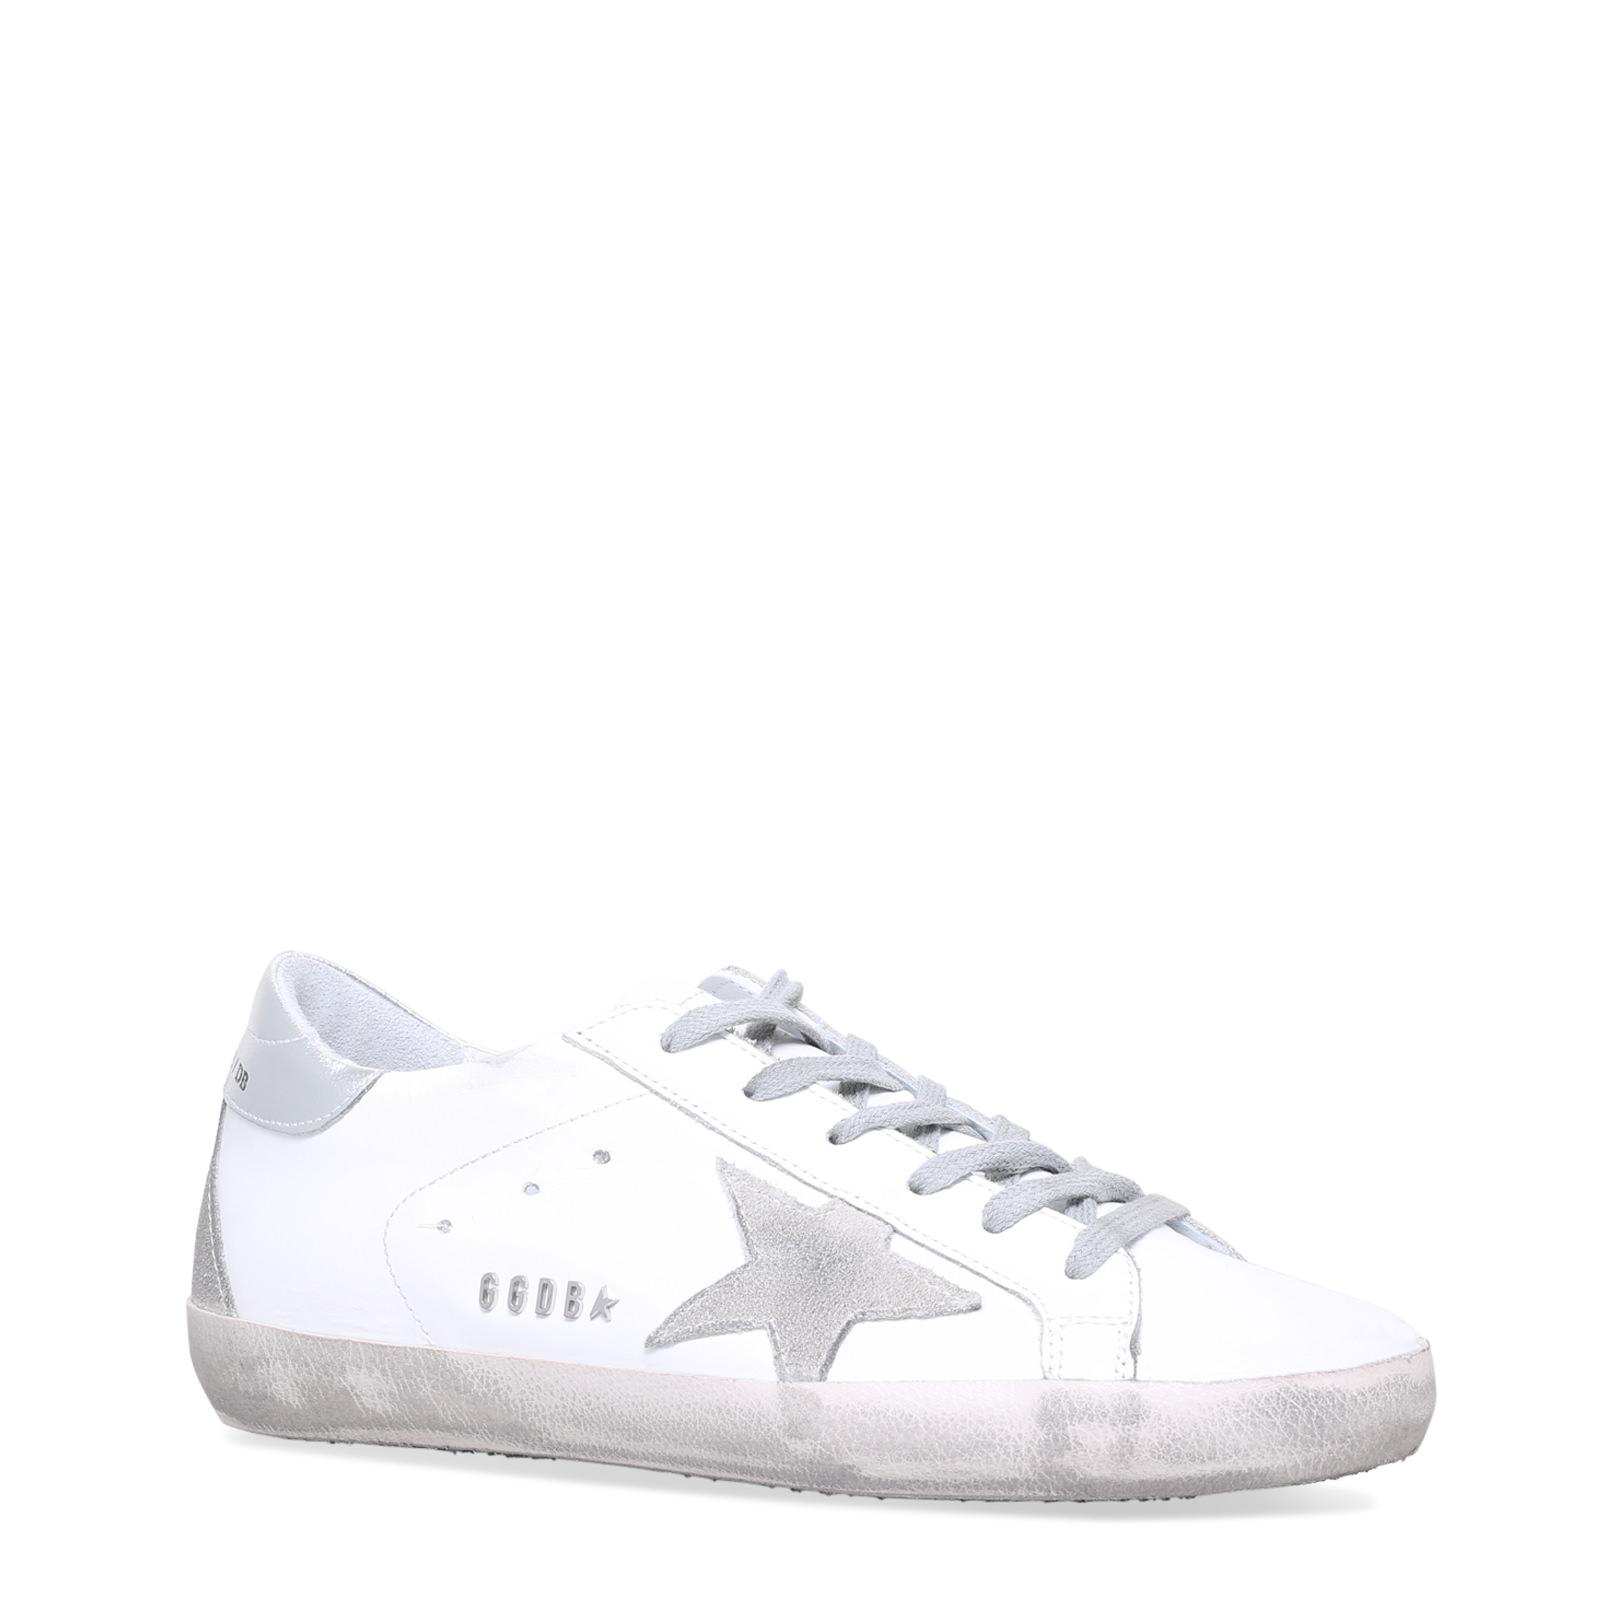 Superstar W77 Trainers